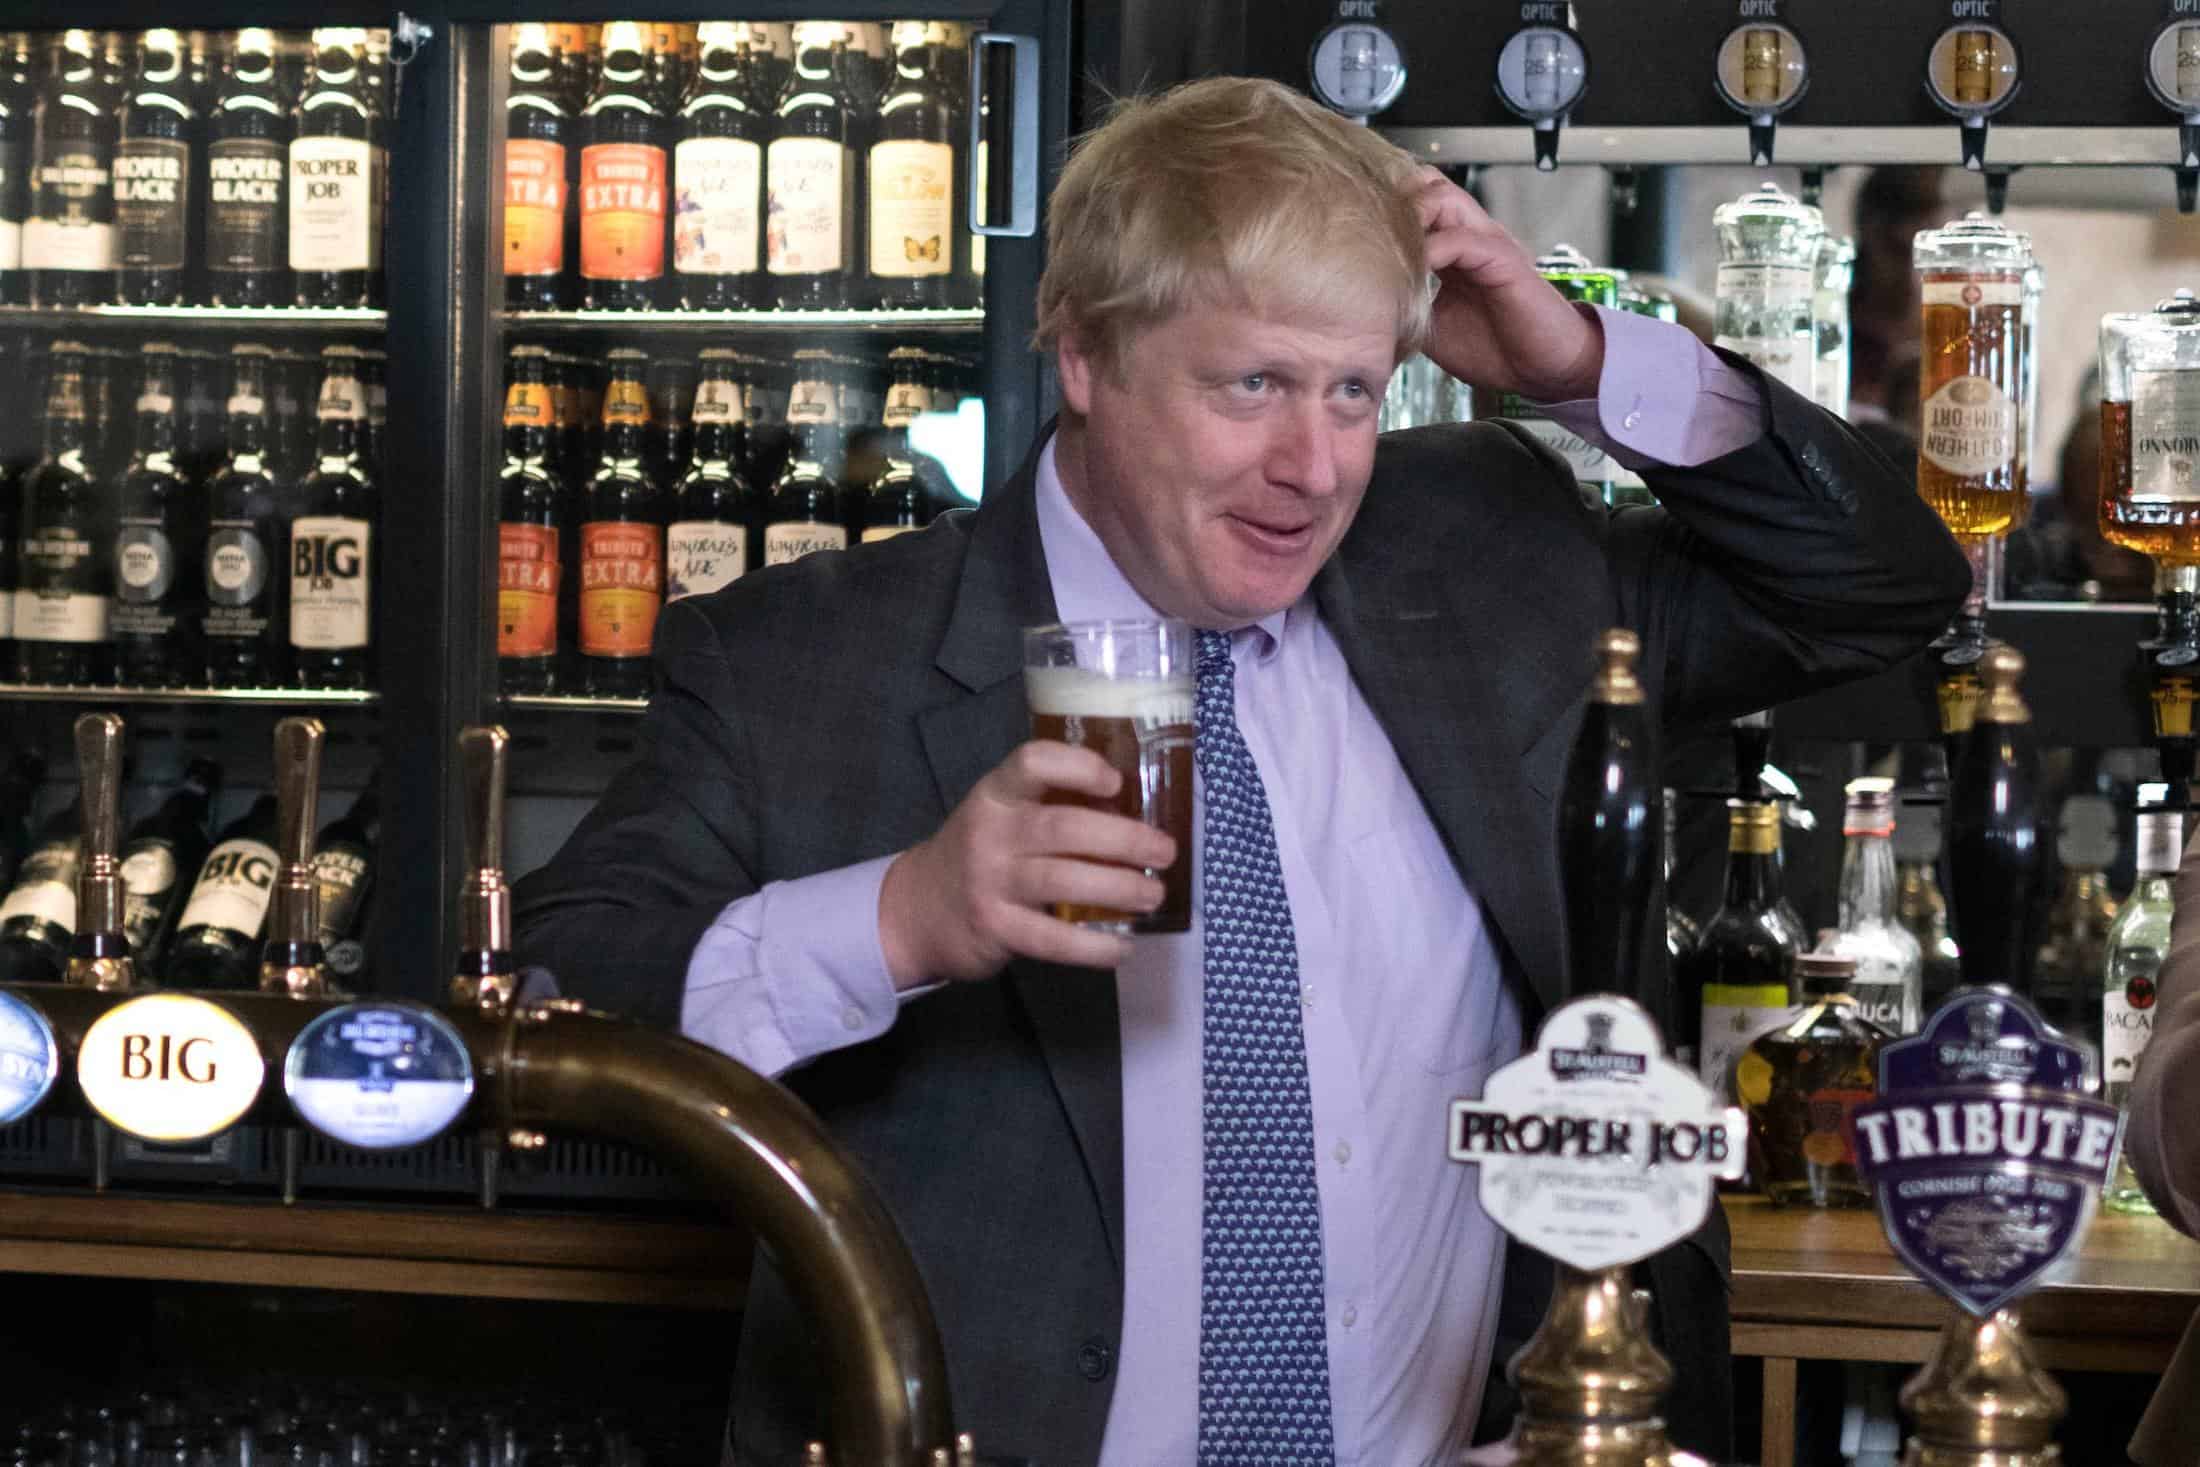 Video – PM urged ‘patriotic best’ & go to pub now Govt minister blames it for rise in infections